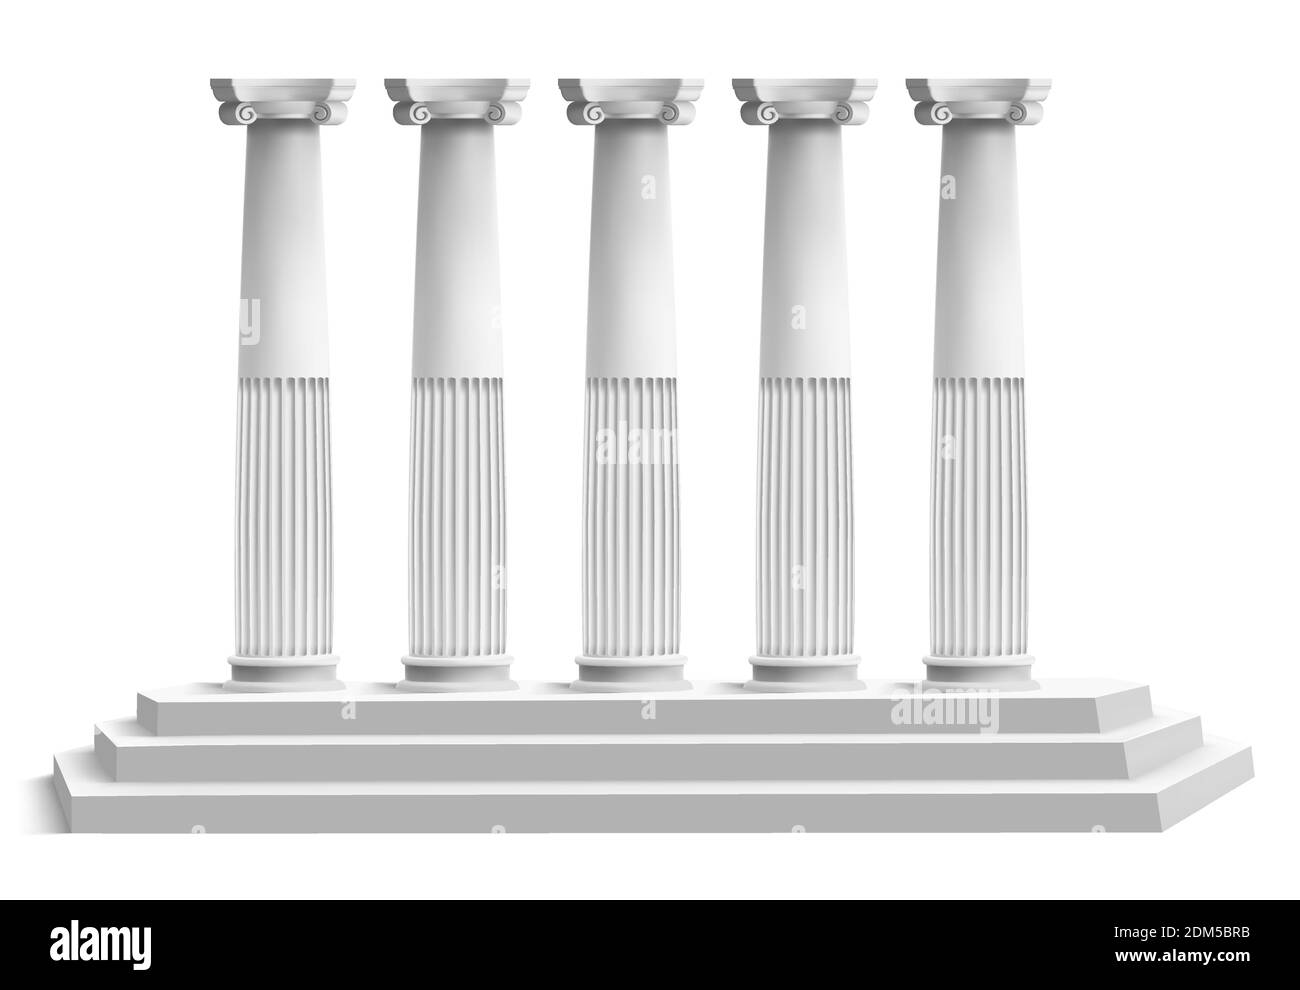 Realistic temple columns. Ancient greek pillars with marble 3d stair podium. Antique columns facade vector illustration Stock Vector